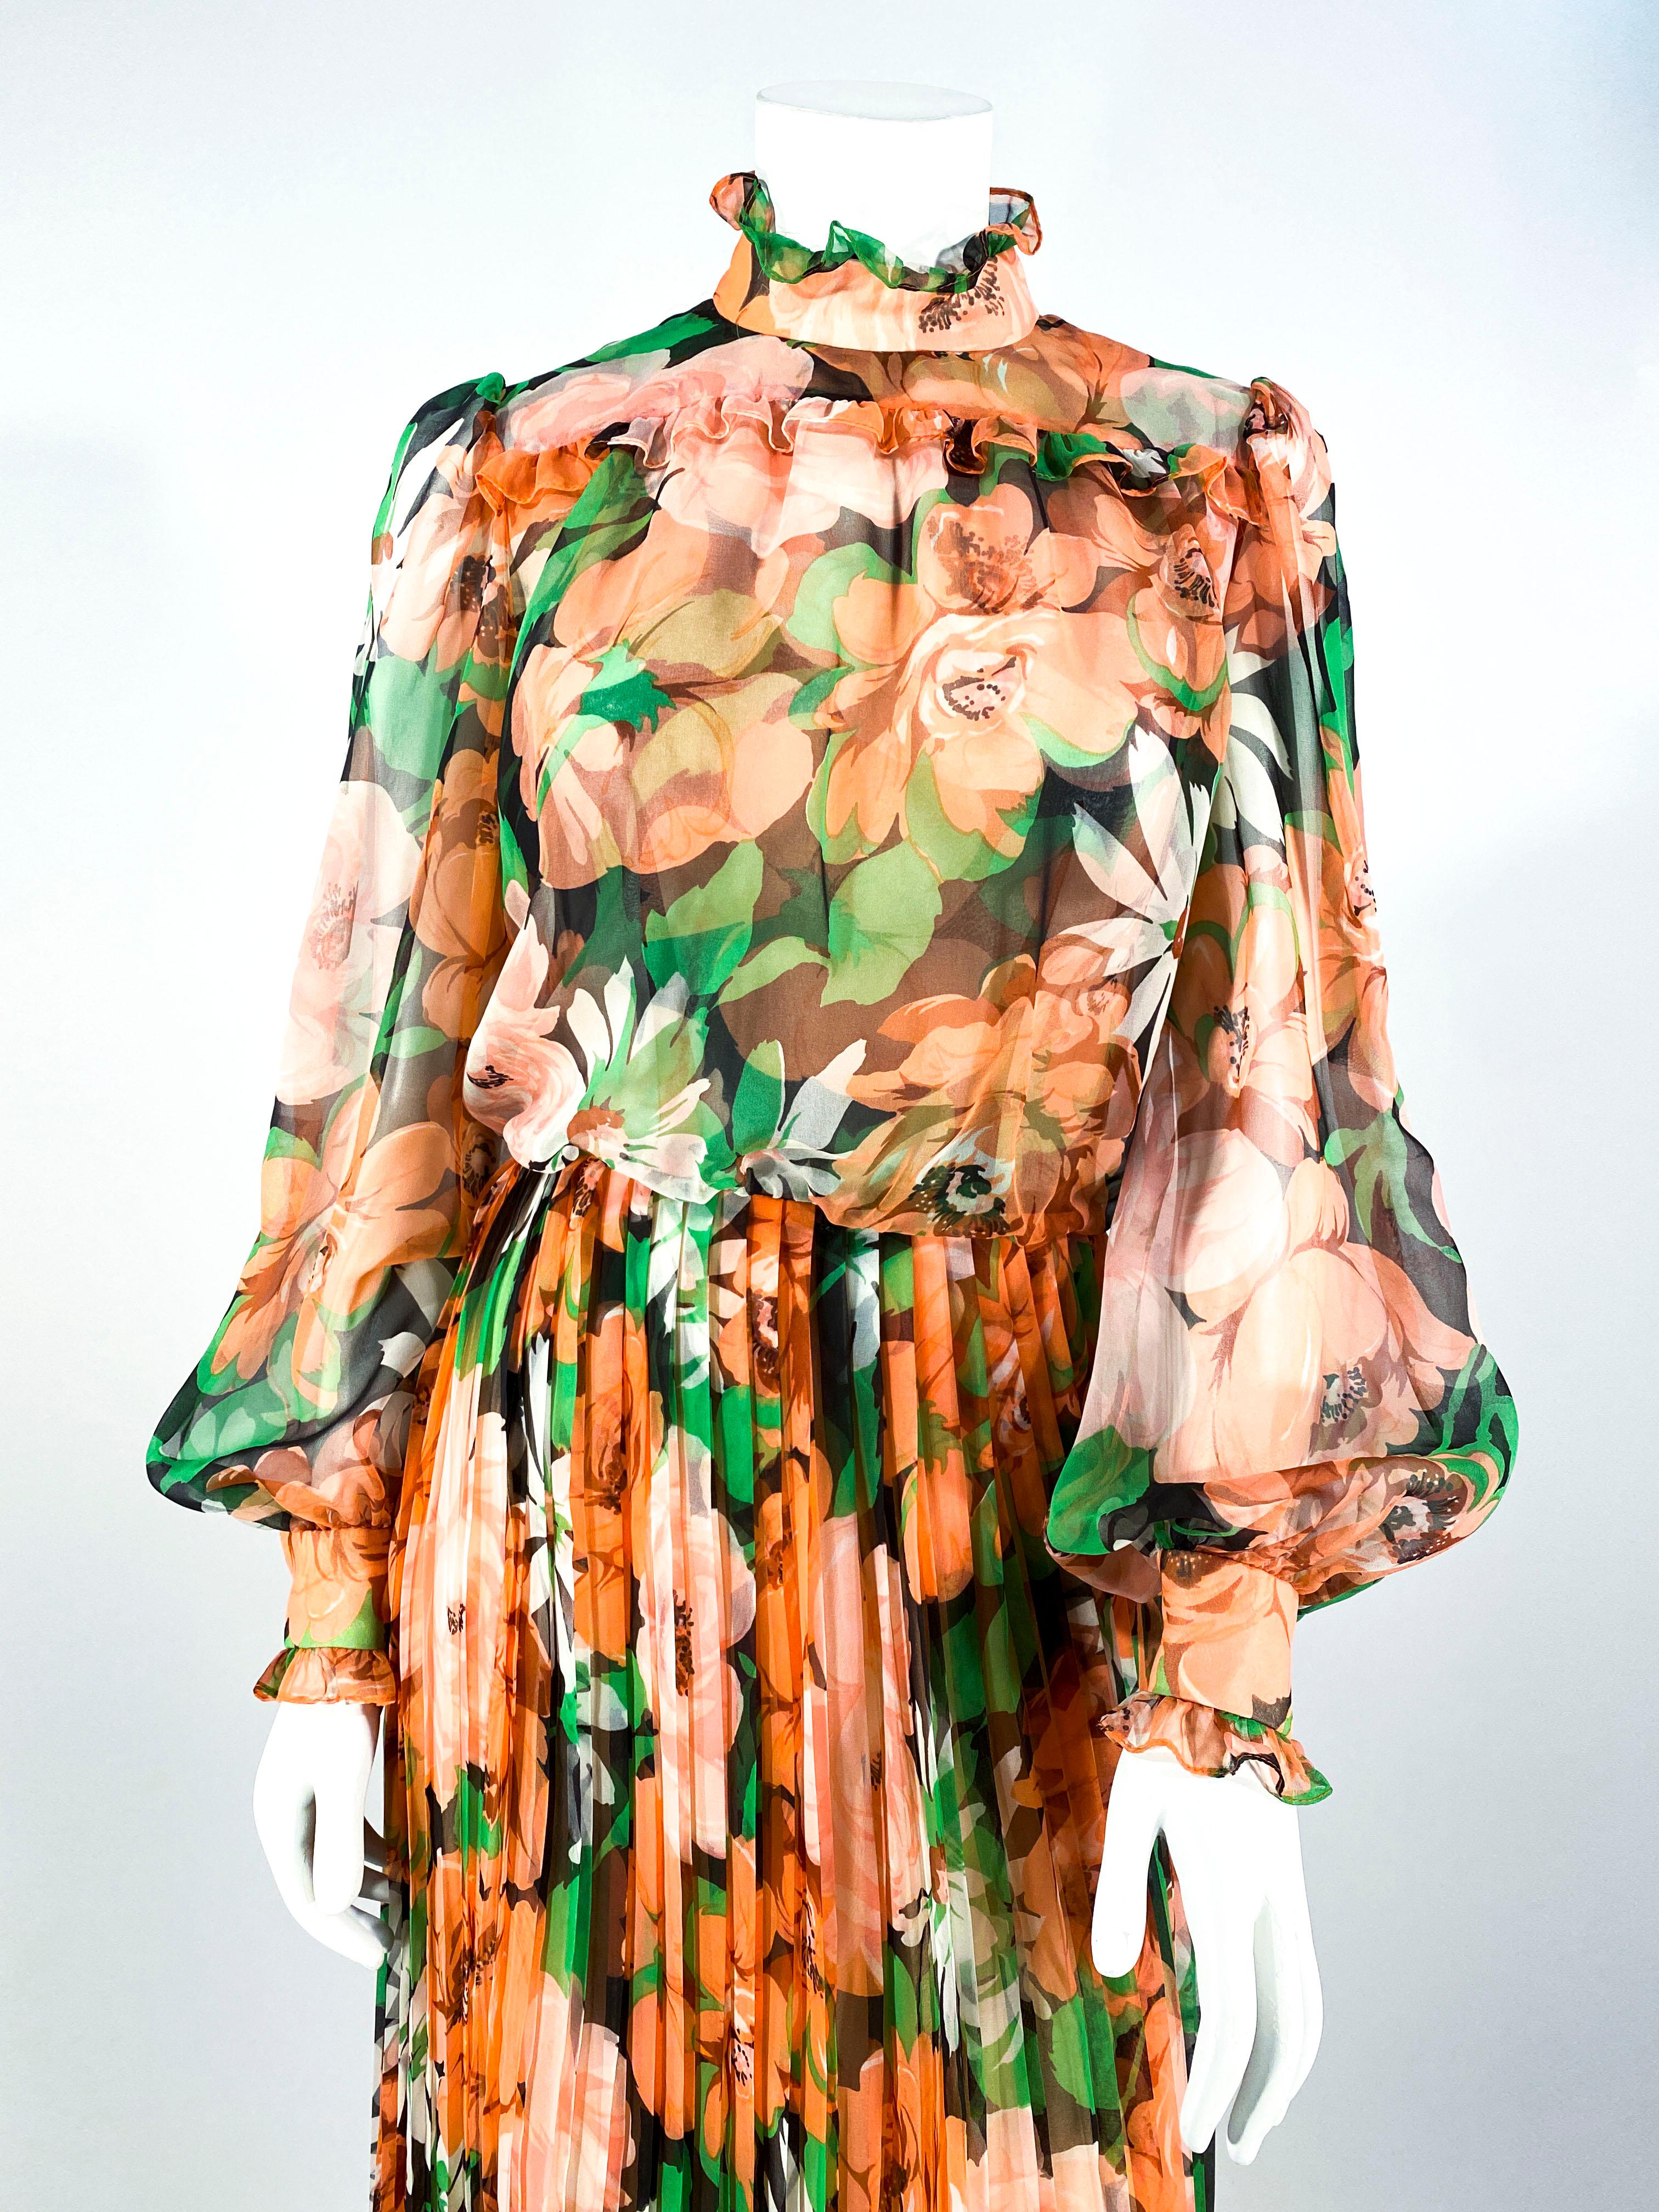 1970s floral printed chiffon prairie dress featuring sheer full length bishop sleeves, ruffled cuffs, a pleated skirt, high-neckline, and ruffle trim along the bloused bodice. The pleated skirt extends to ankle length and is lined.